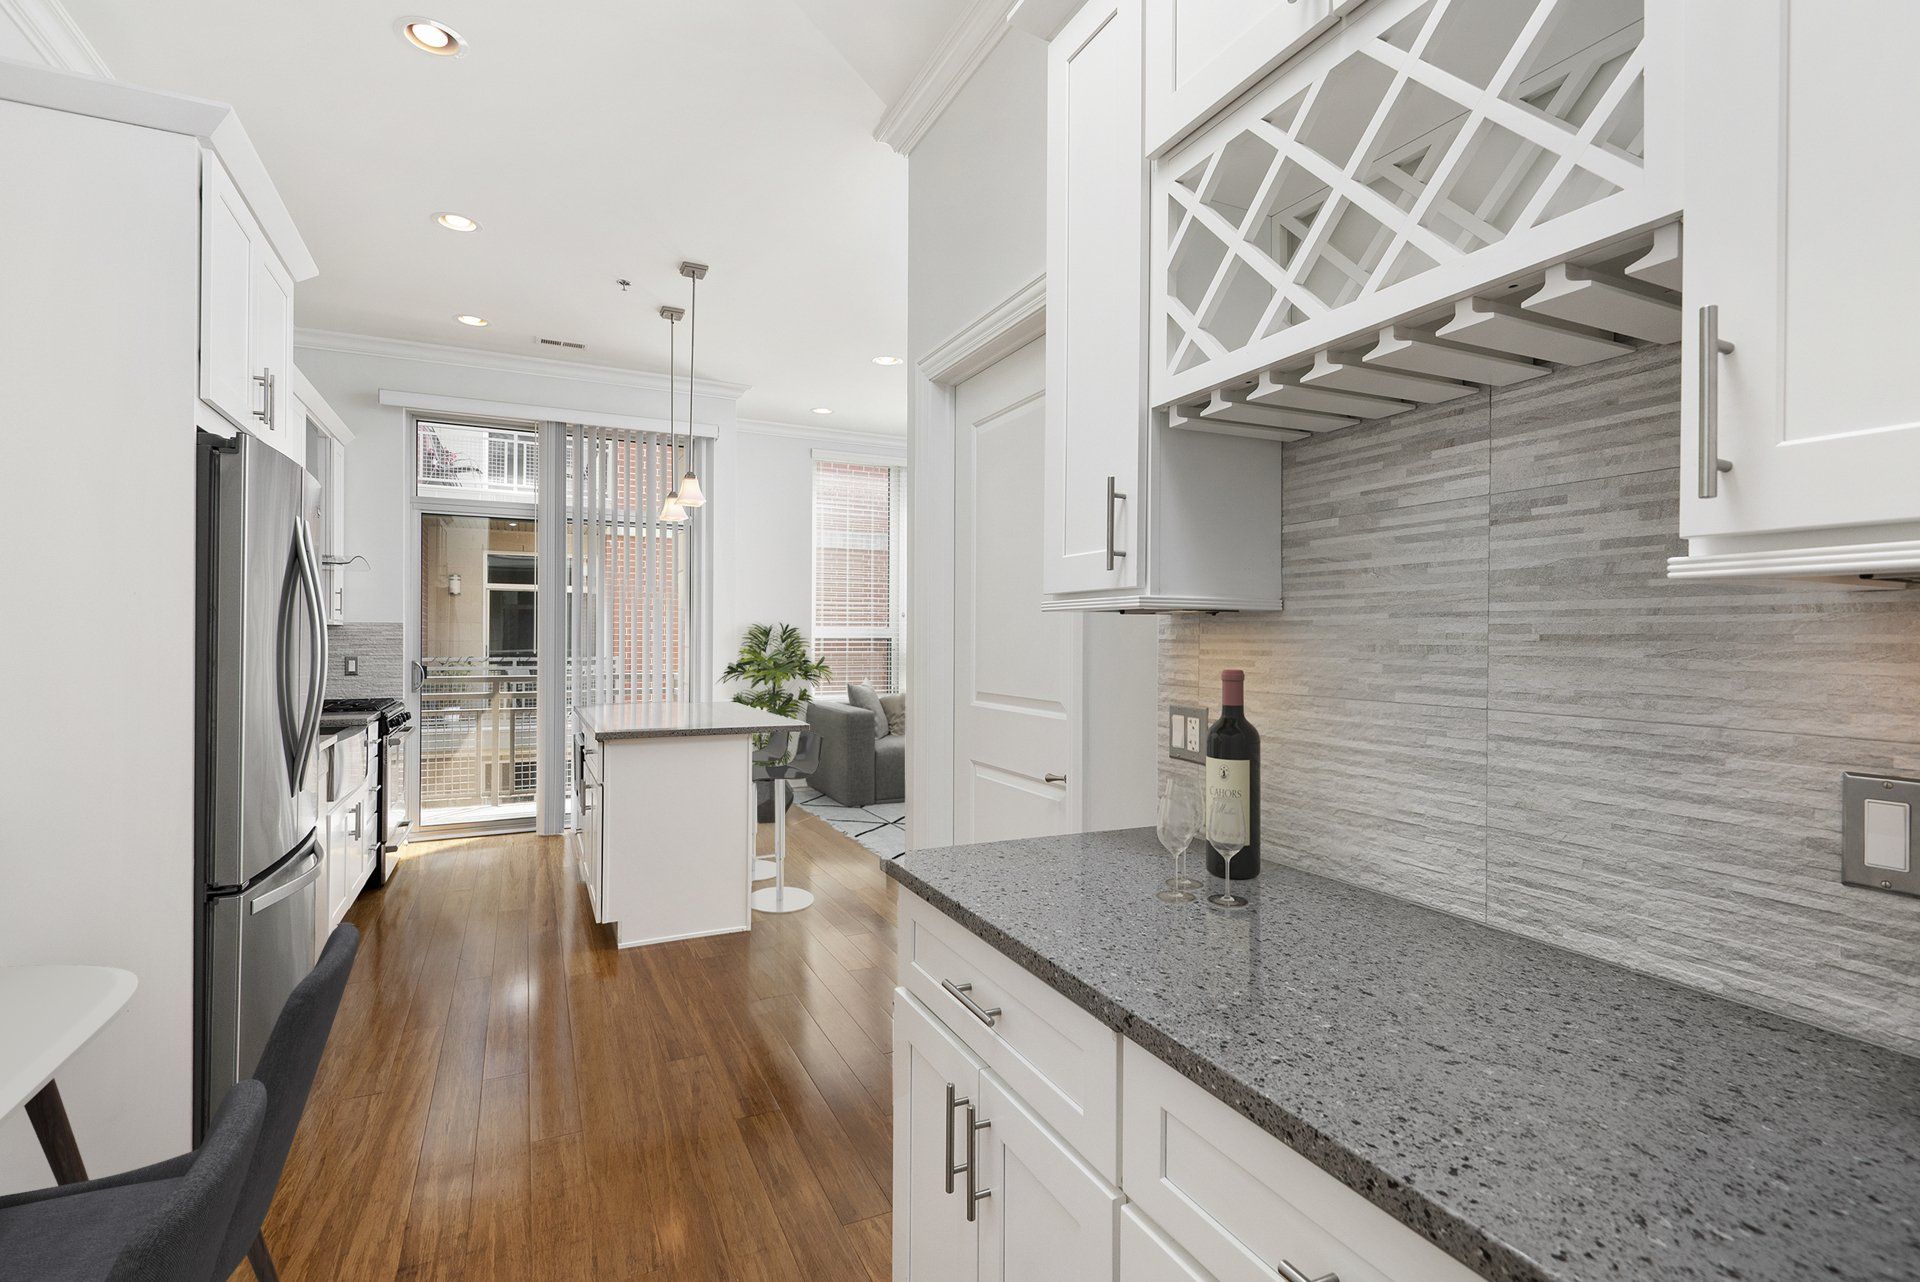 A kitchen with white cabinets, granite countertops, a wine rack, and a bottle of wine on the counter at Reside on Jackson.